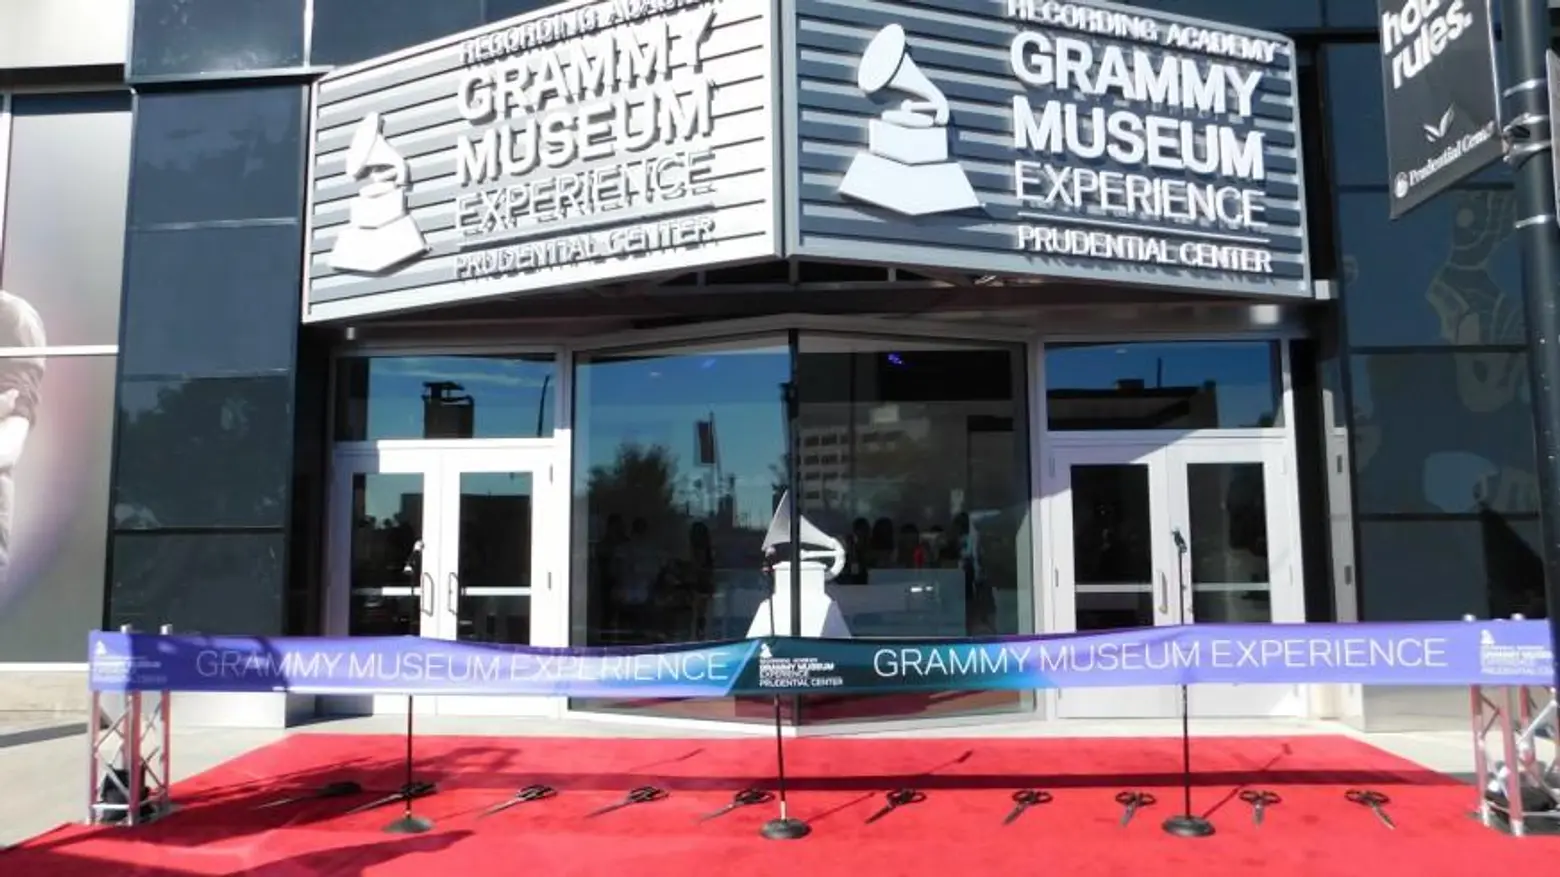 Newark opens Grammy Museum Experience to honor the city’s musical heritage